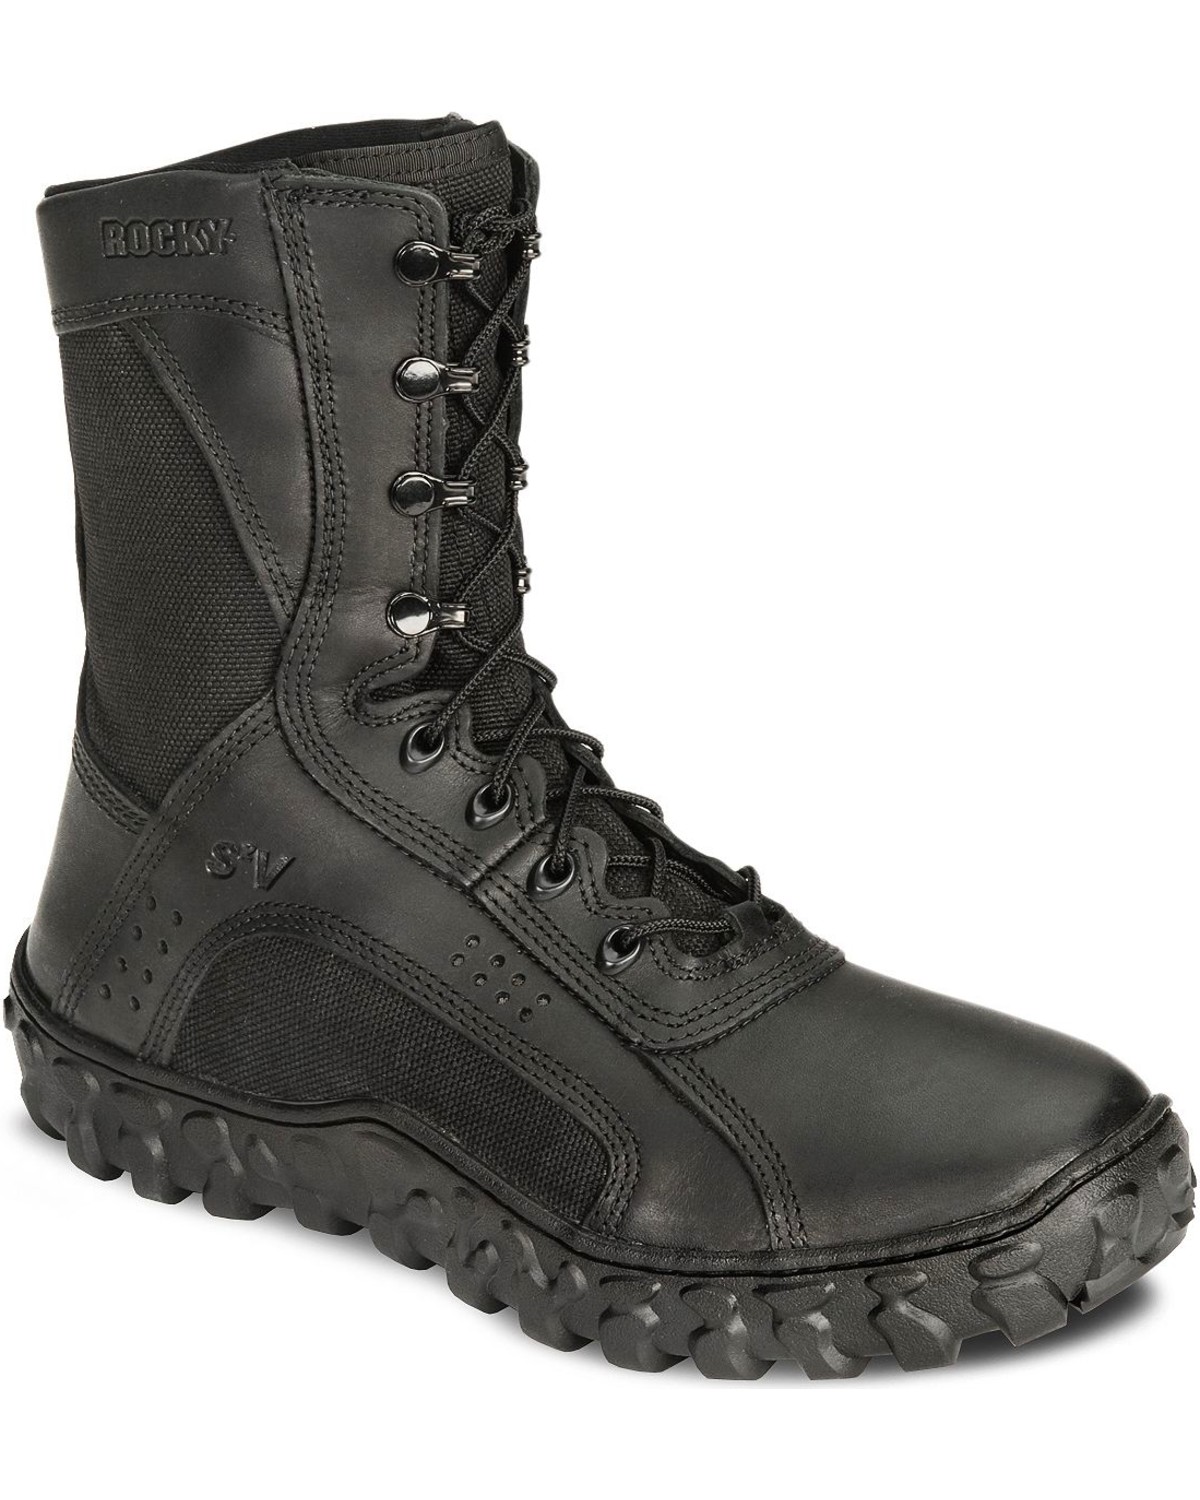 Rocky S2V Vented 8" Lace-Up Military Boots - Round Toe